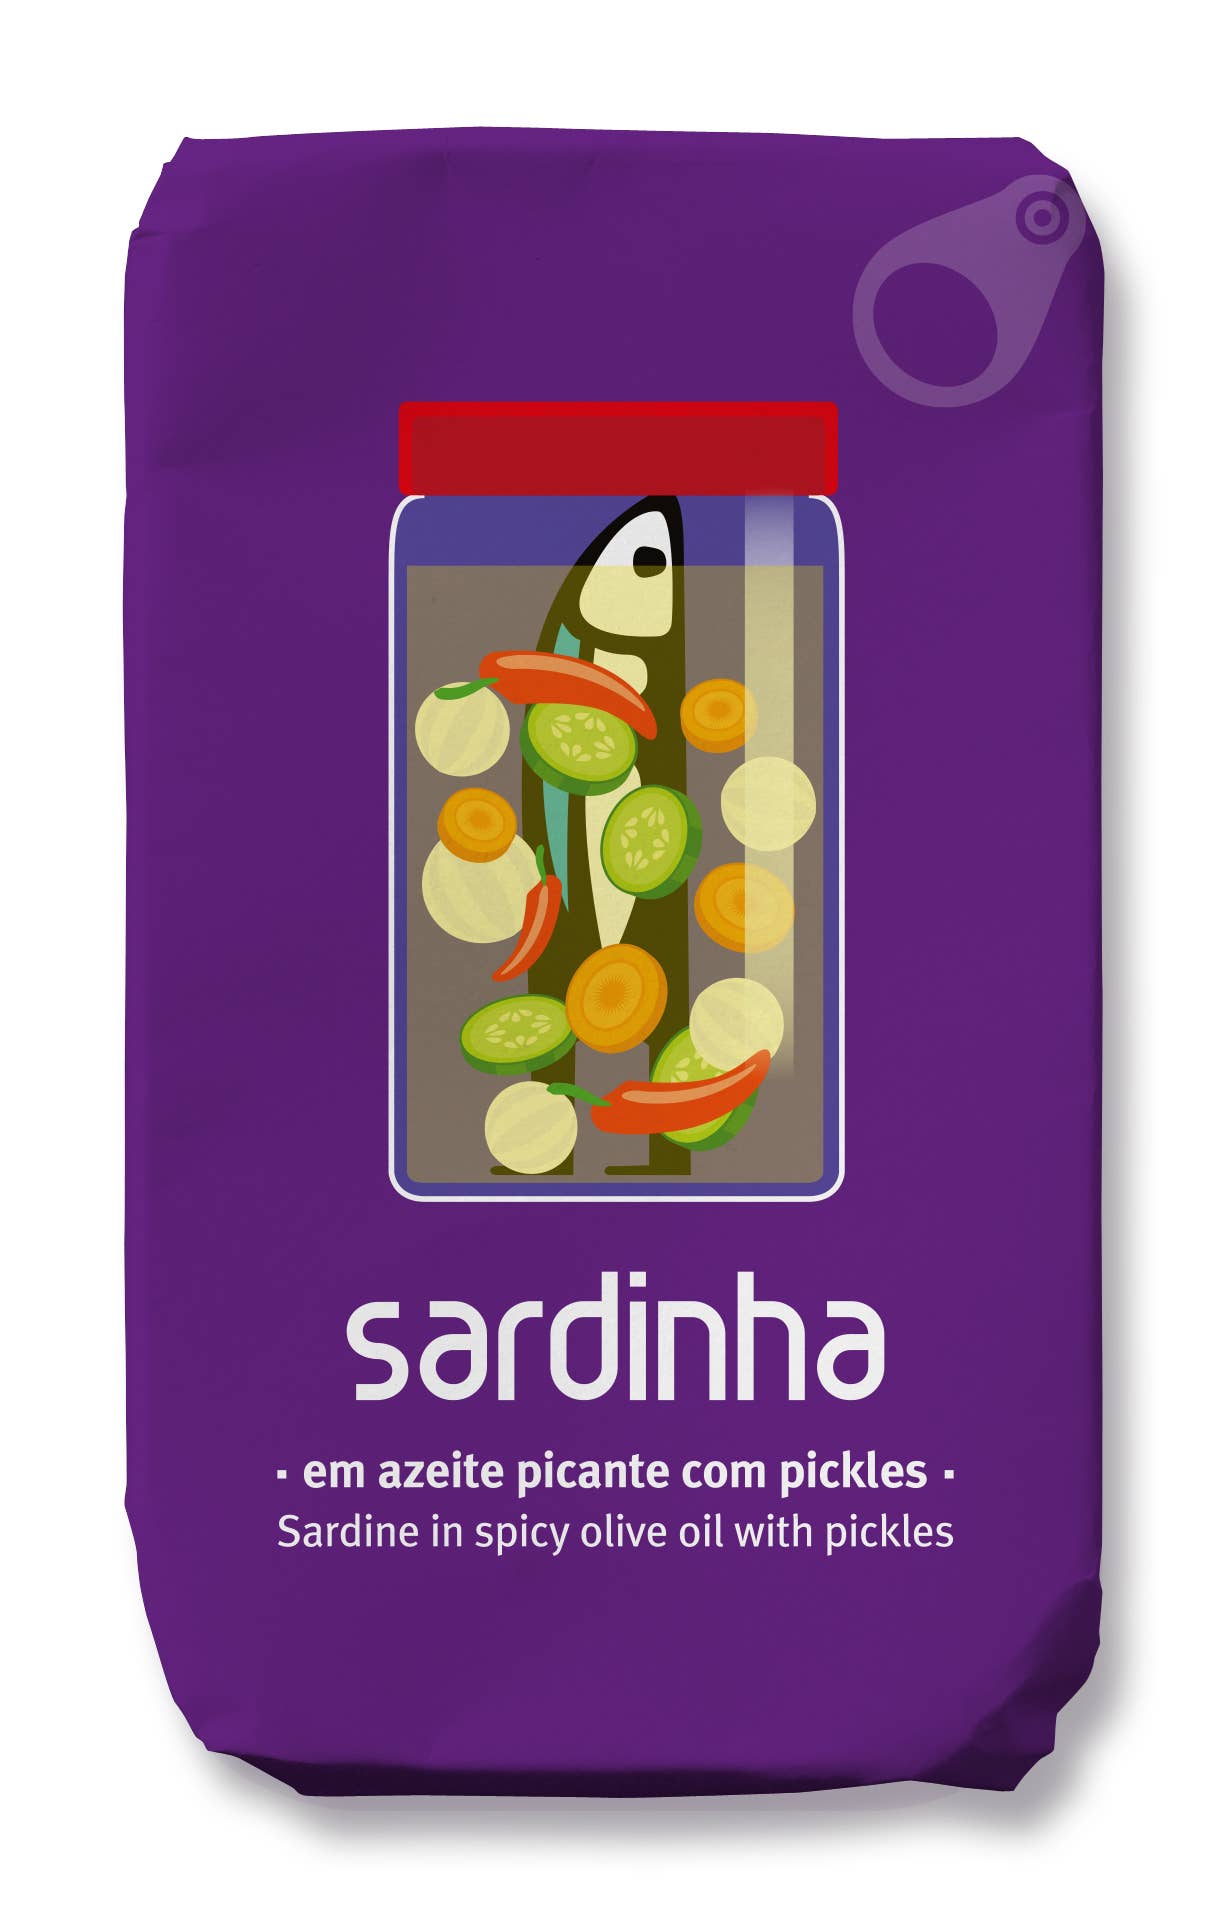 Sardinha - Sardines in Spicy Olive Oil with Pickles - Space Camp